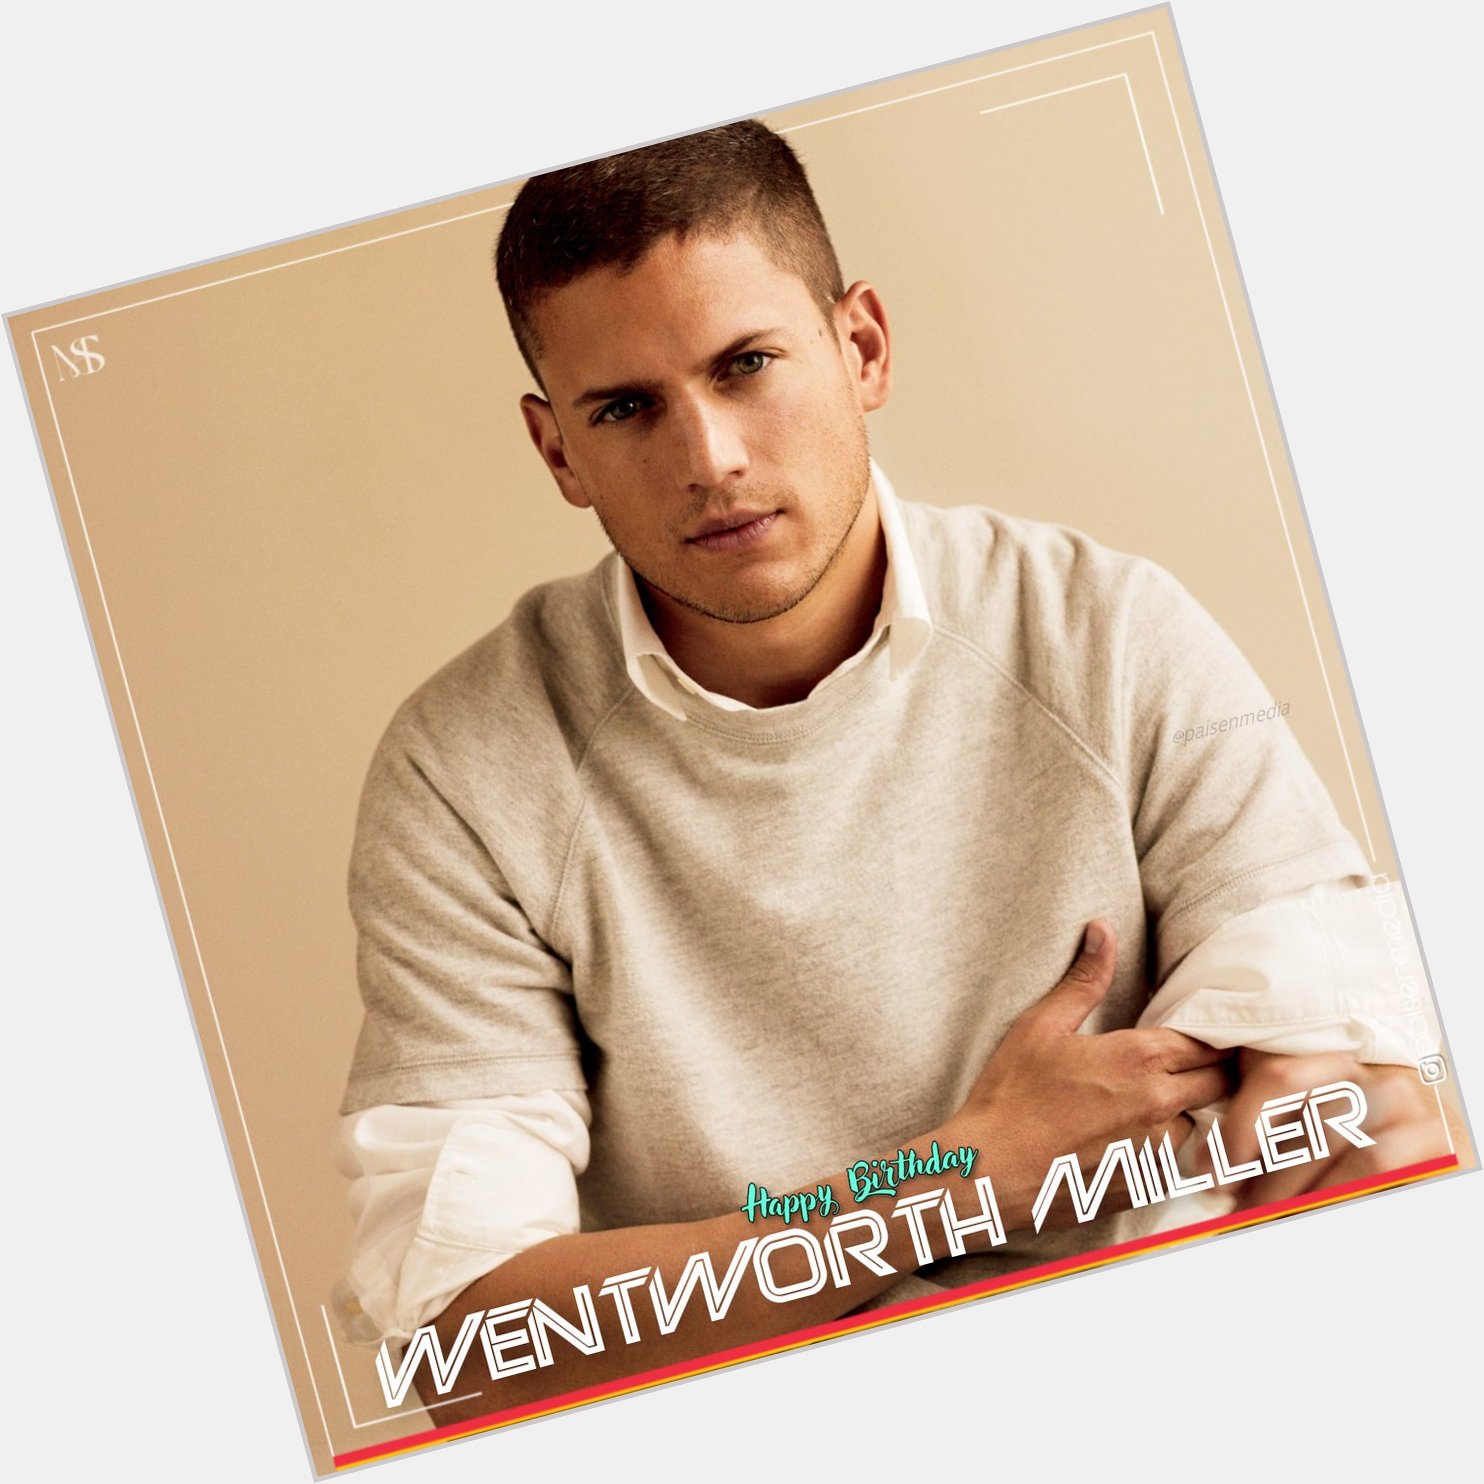 Wishing a very Happy Birthday to Wentworth Miller sir .
.
.
.   